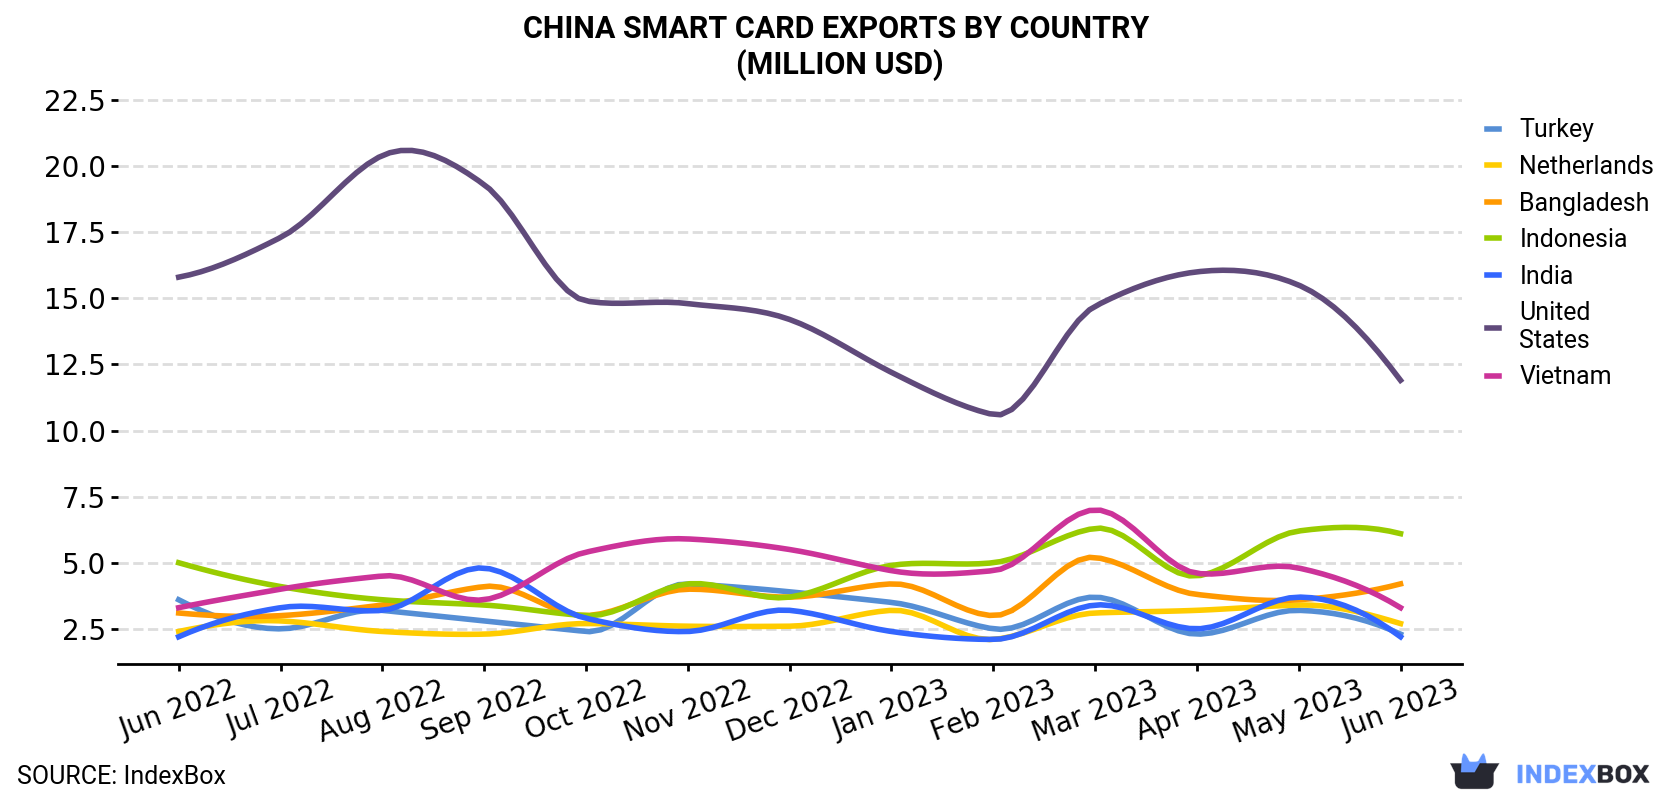 China Smart Card Exports By Country (Million USD)